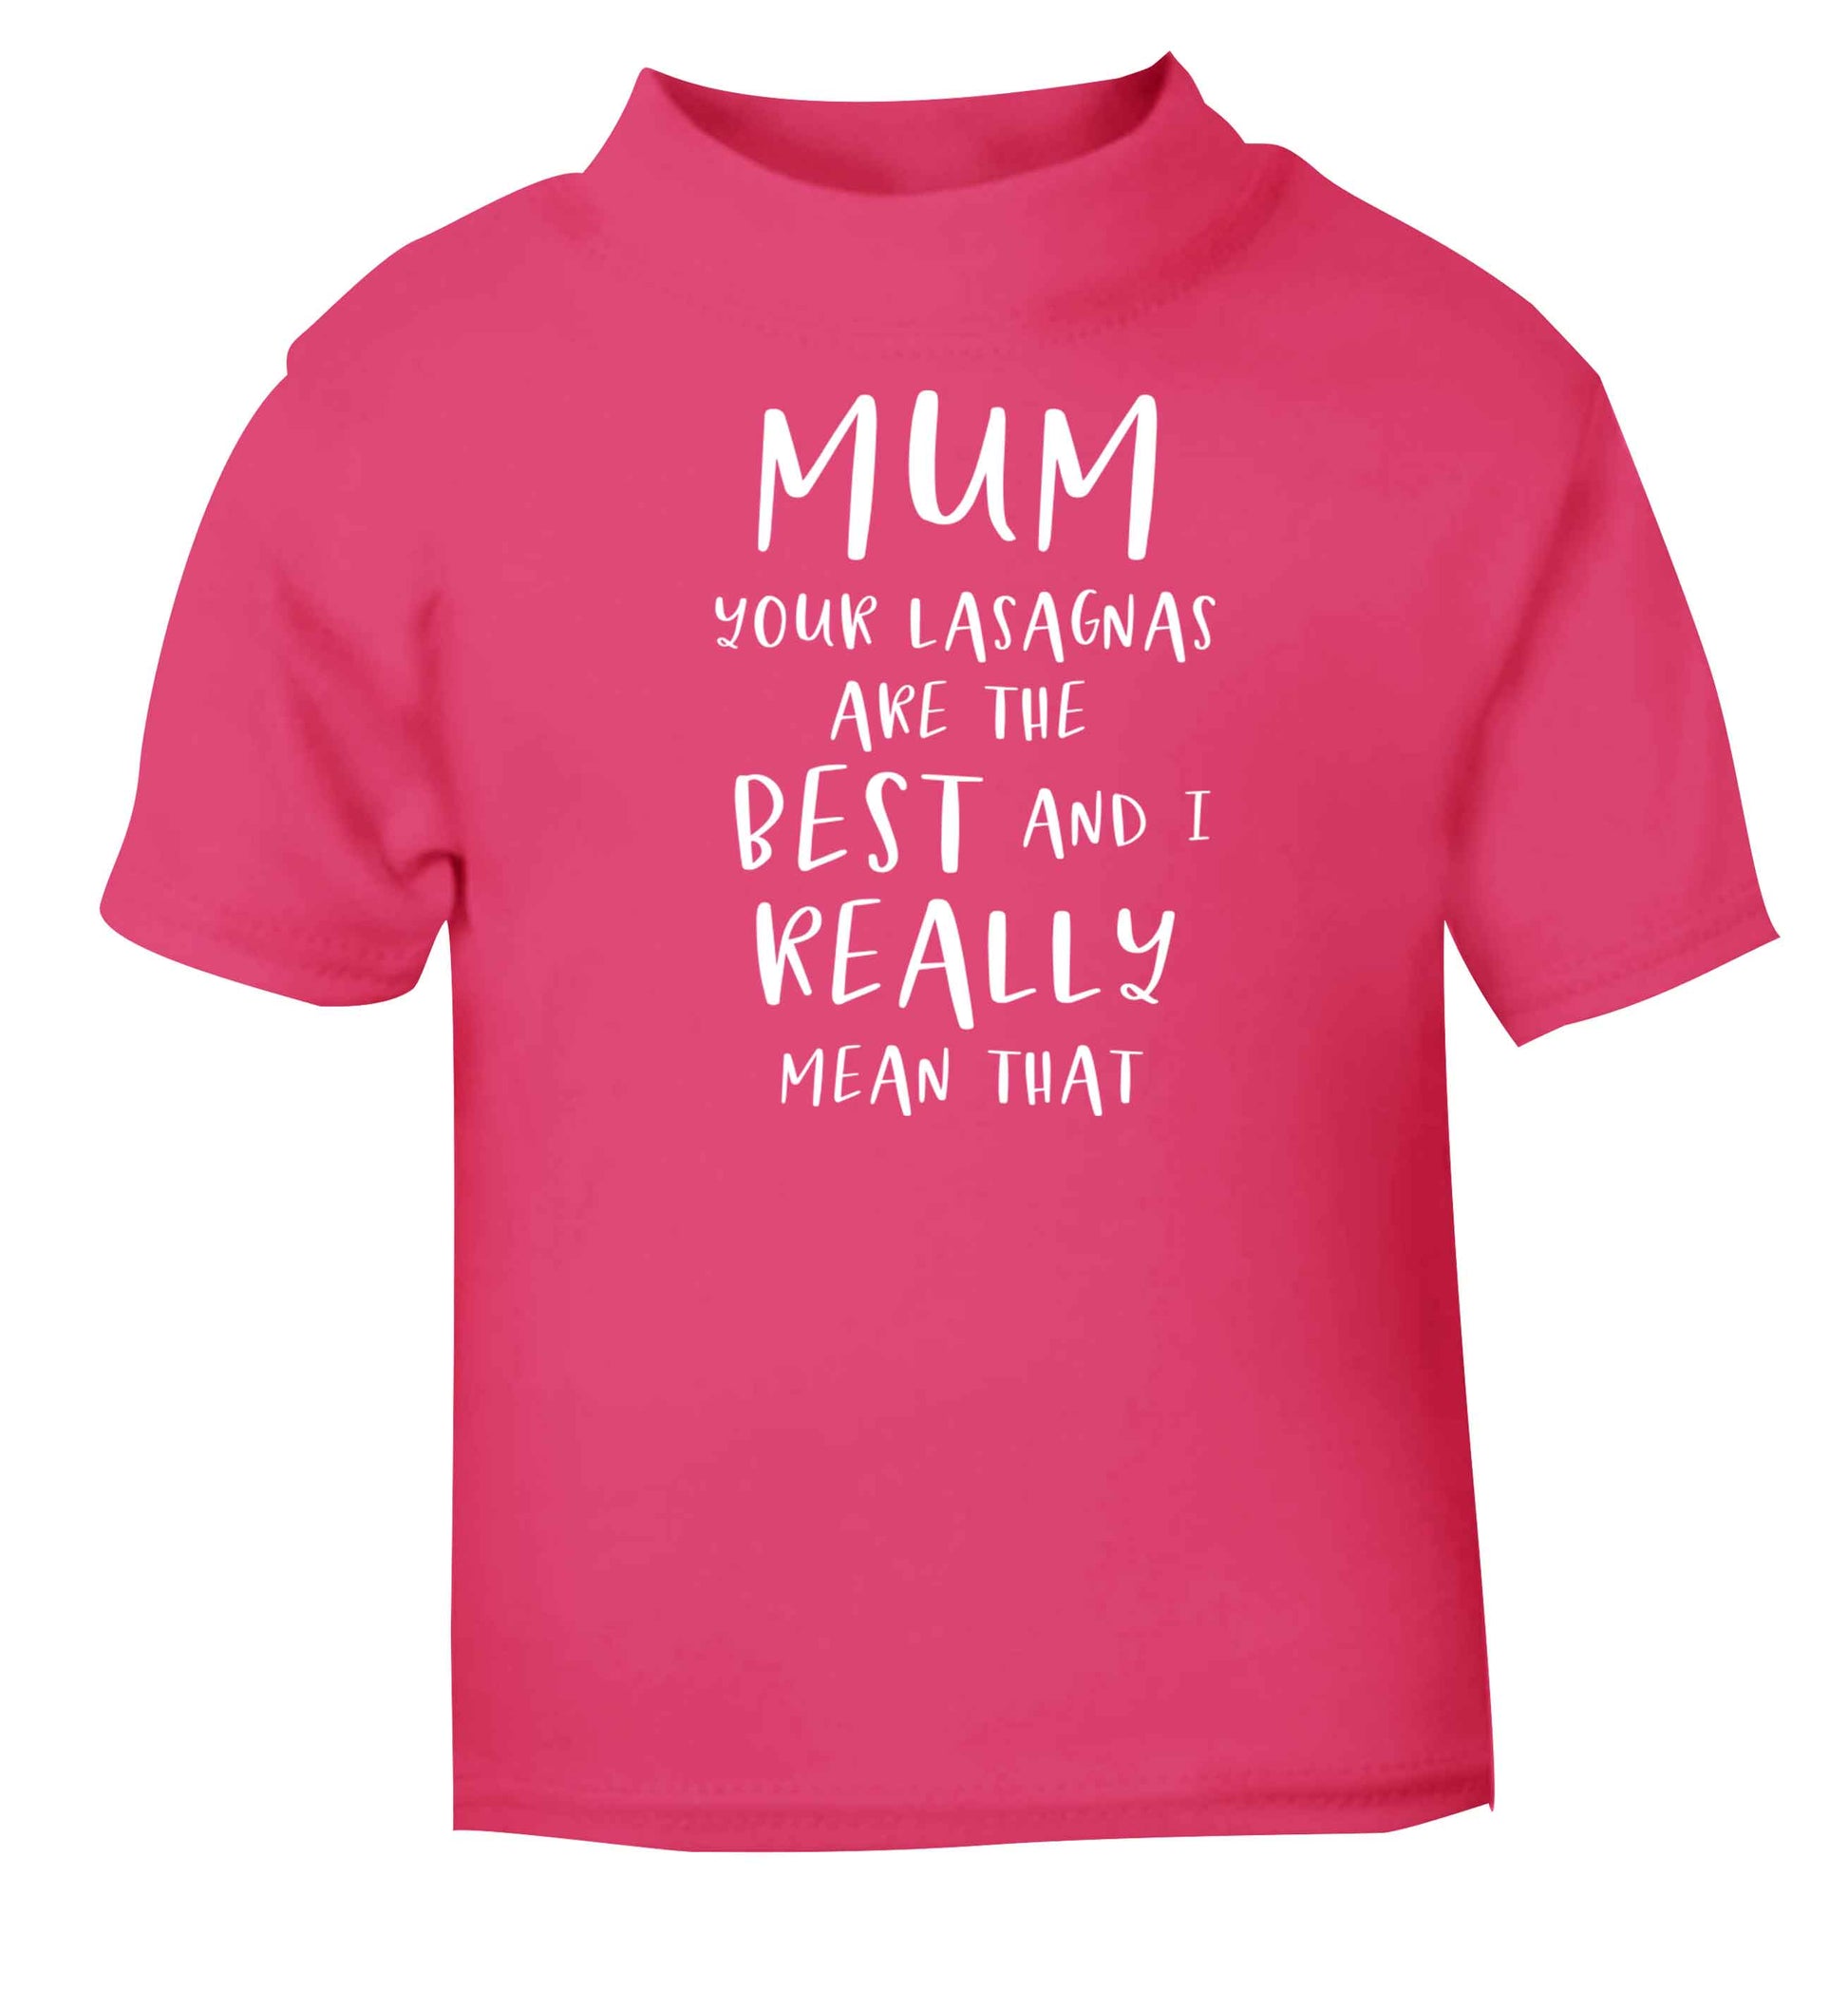 Funny gifts for your mum on mother's dayor her birthday! Mum your lasagnas are the best and I really mean that pink baby toddler Tshirt 2 Years